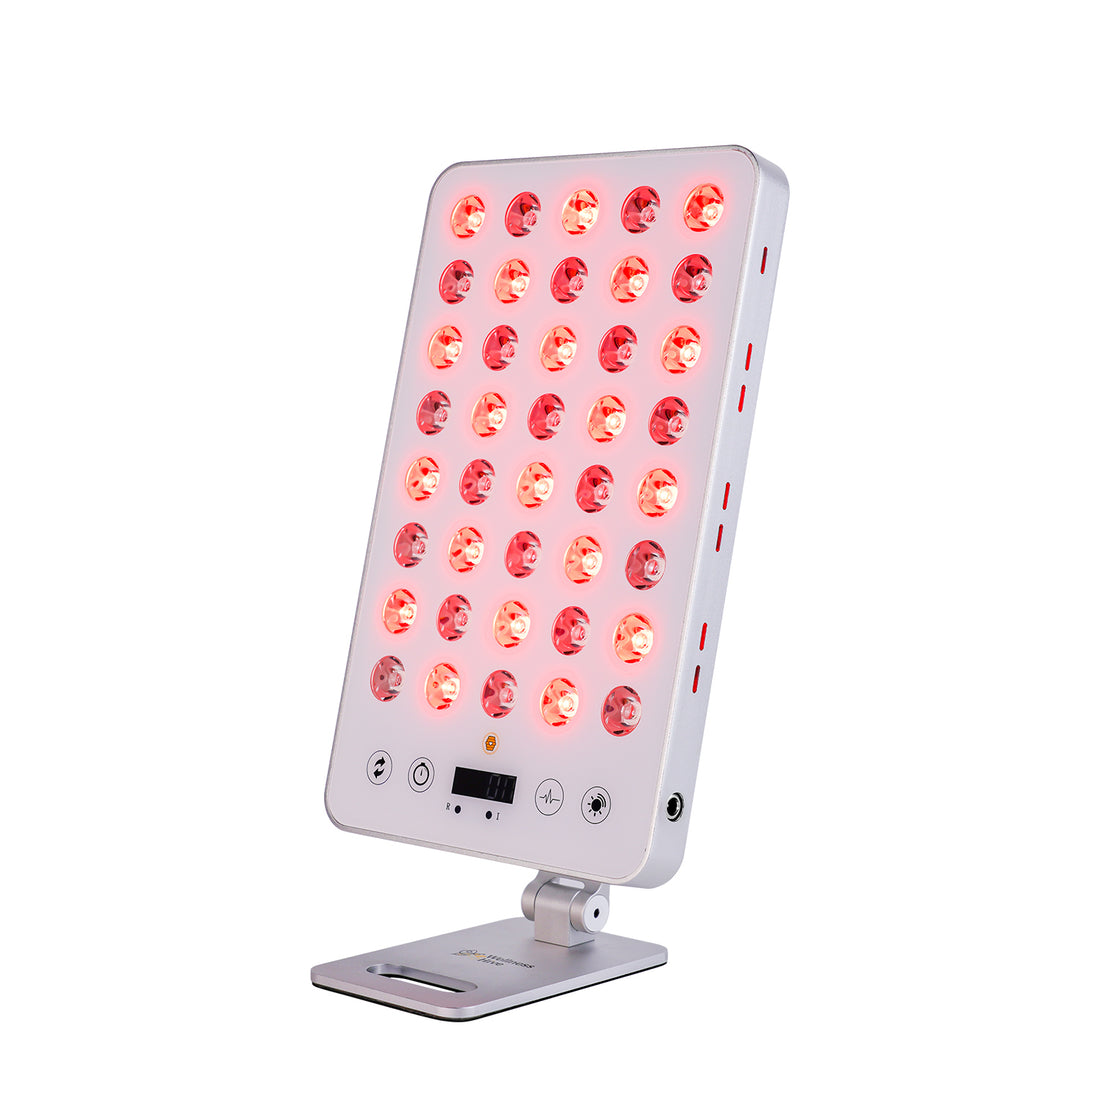 Illuminating Health: Unraveling the Mysteries of Red Light Therapy